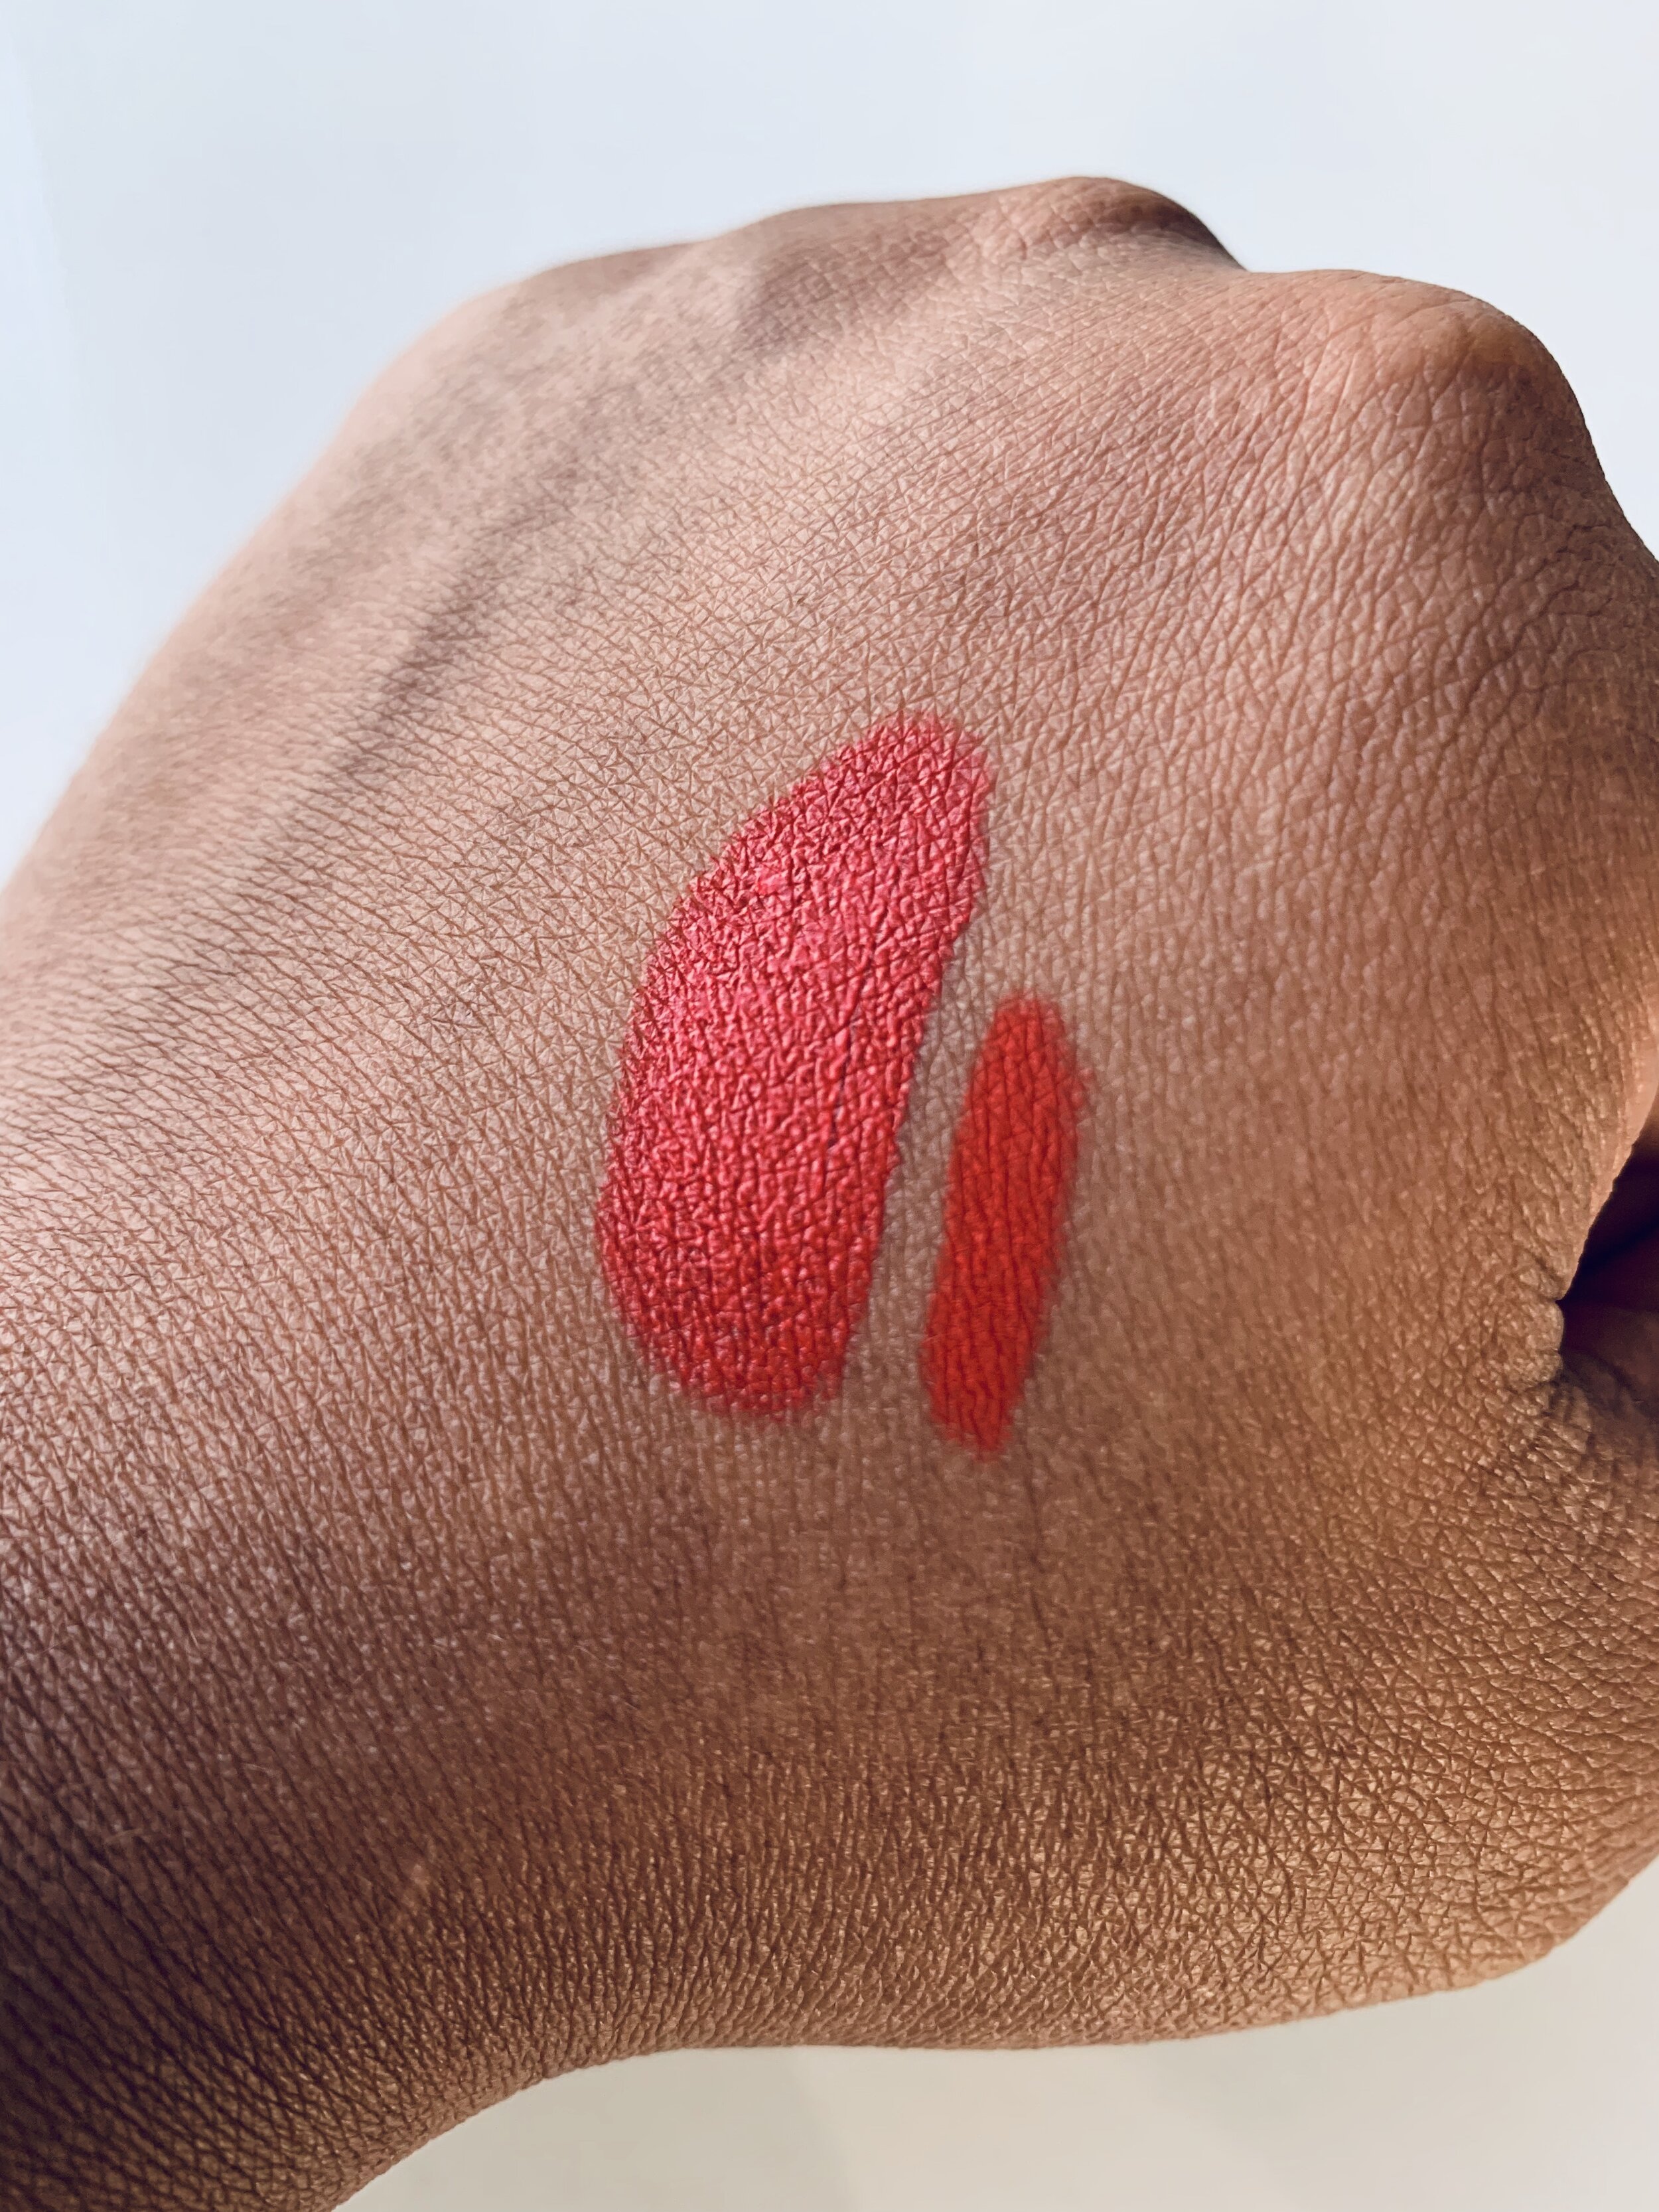 KKW Beauty Classic Red Lipstick Review On Skin Tones